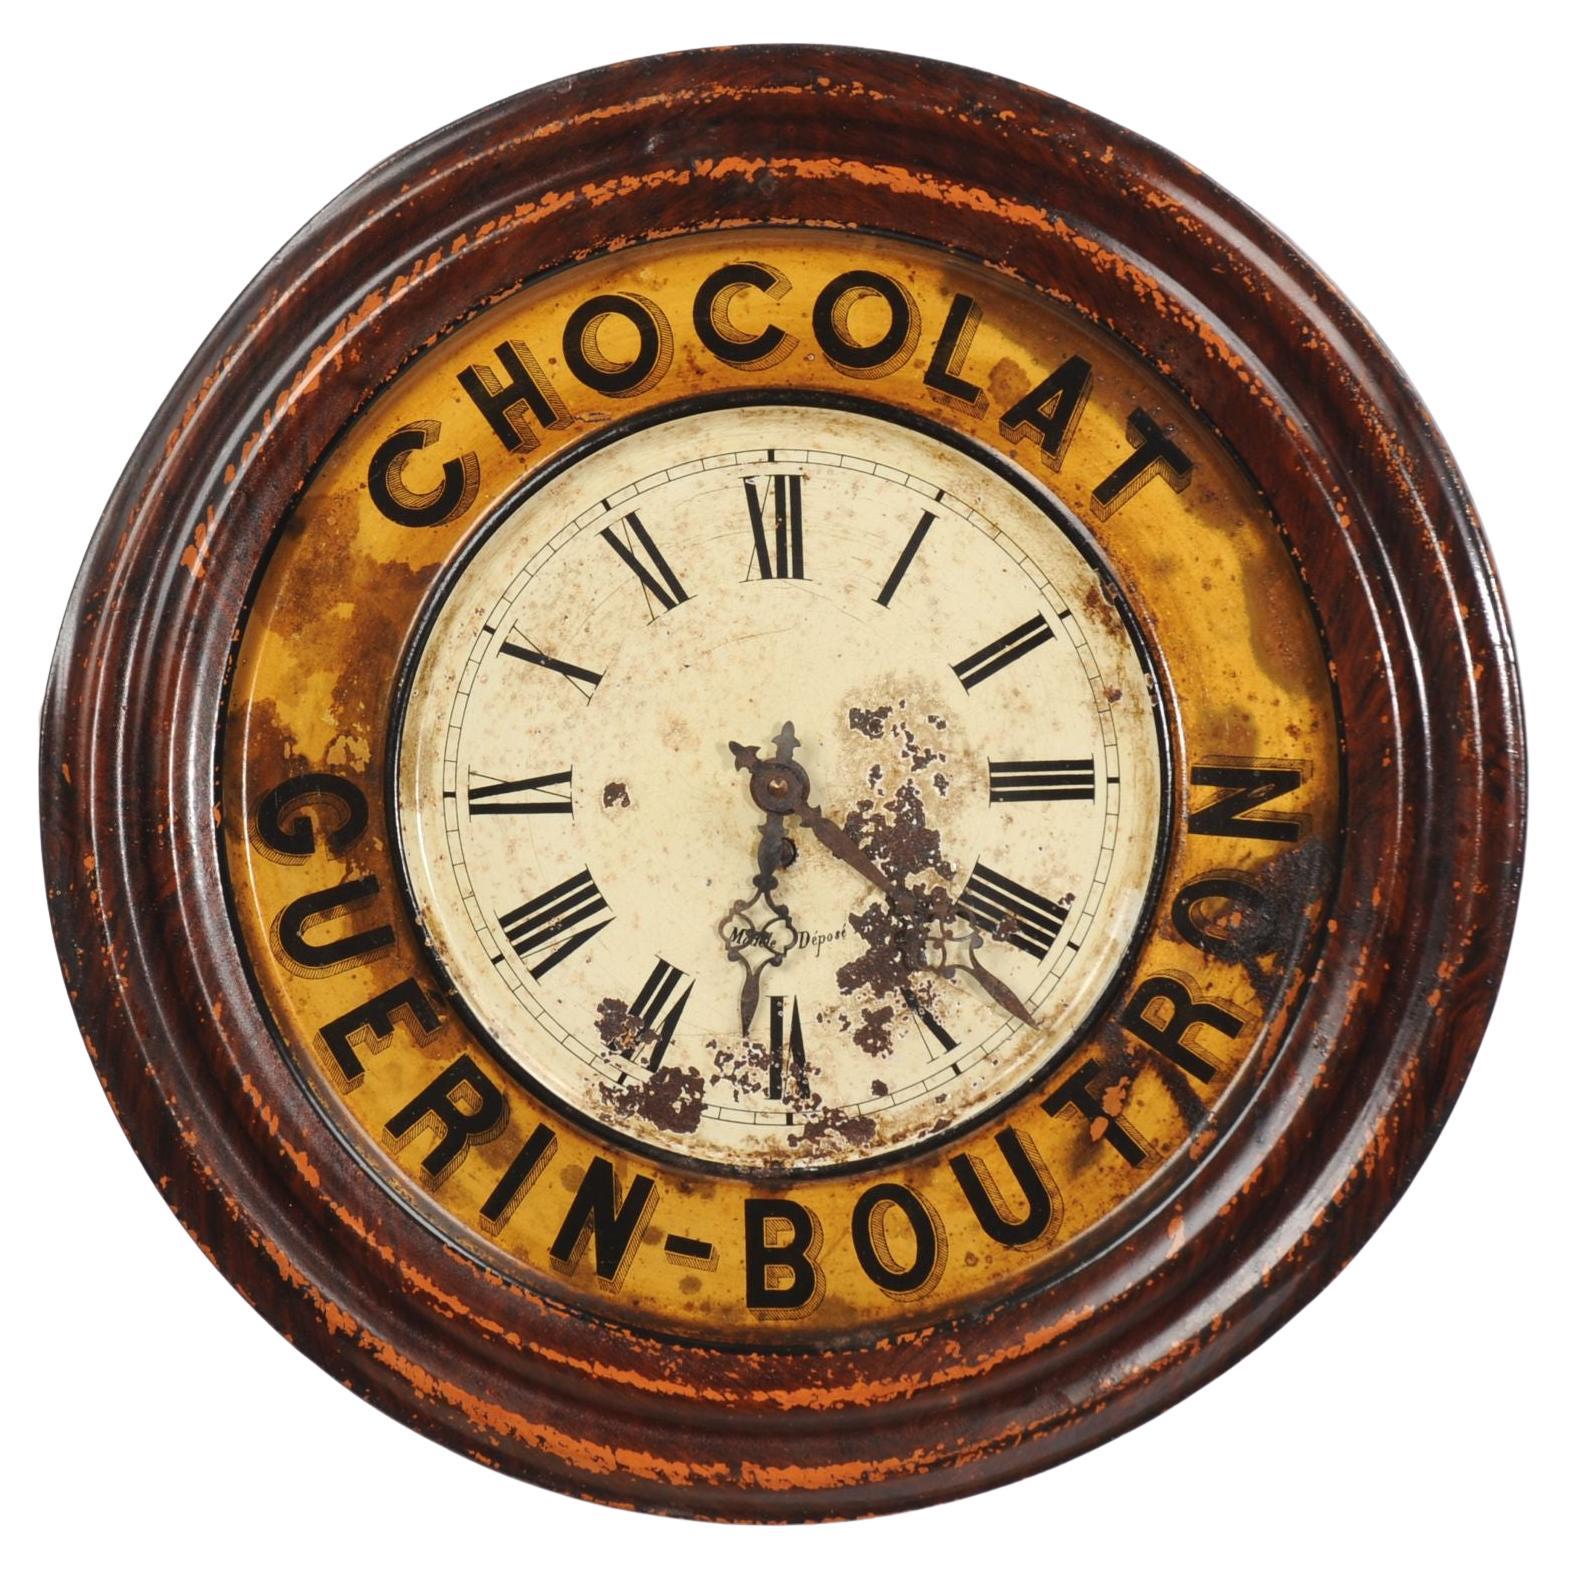 Original French Guerin Boutron Chocolate Advertising Wall Clock, Fully Working